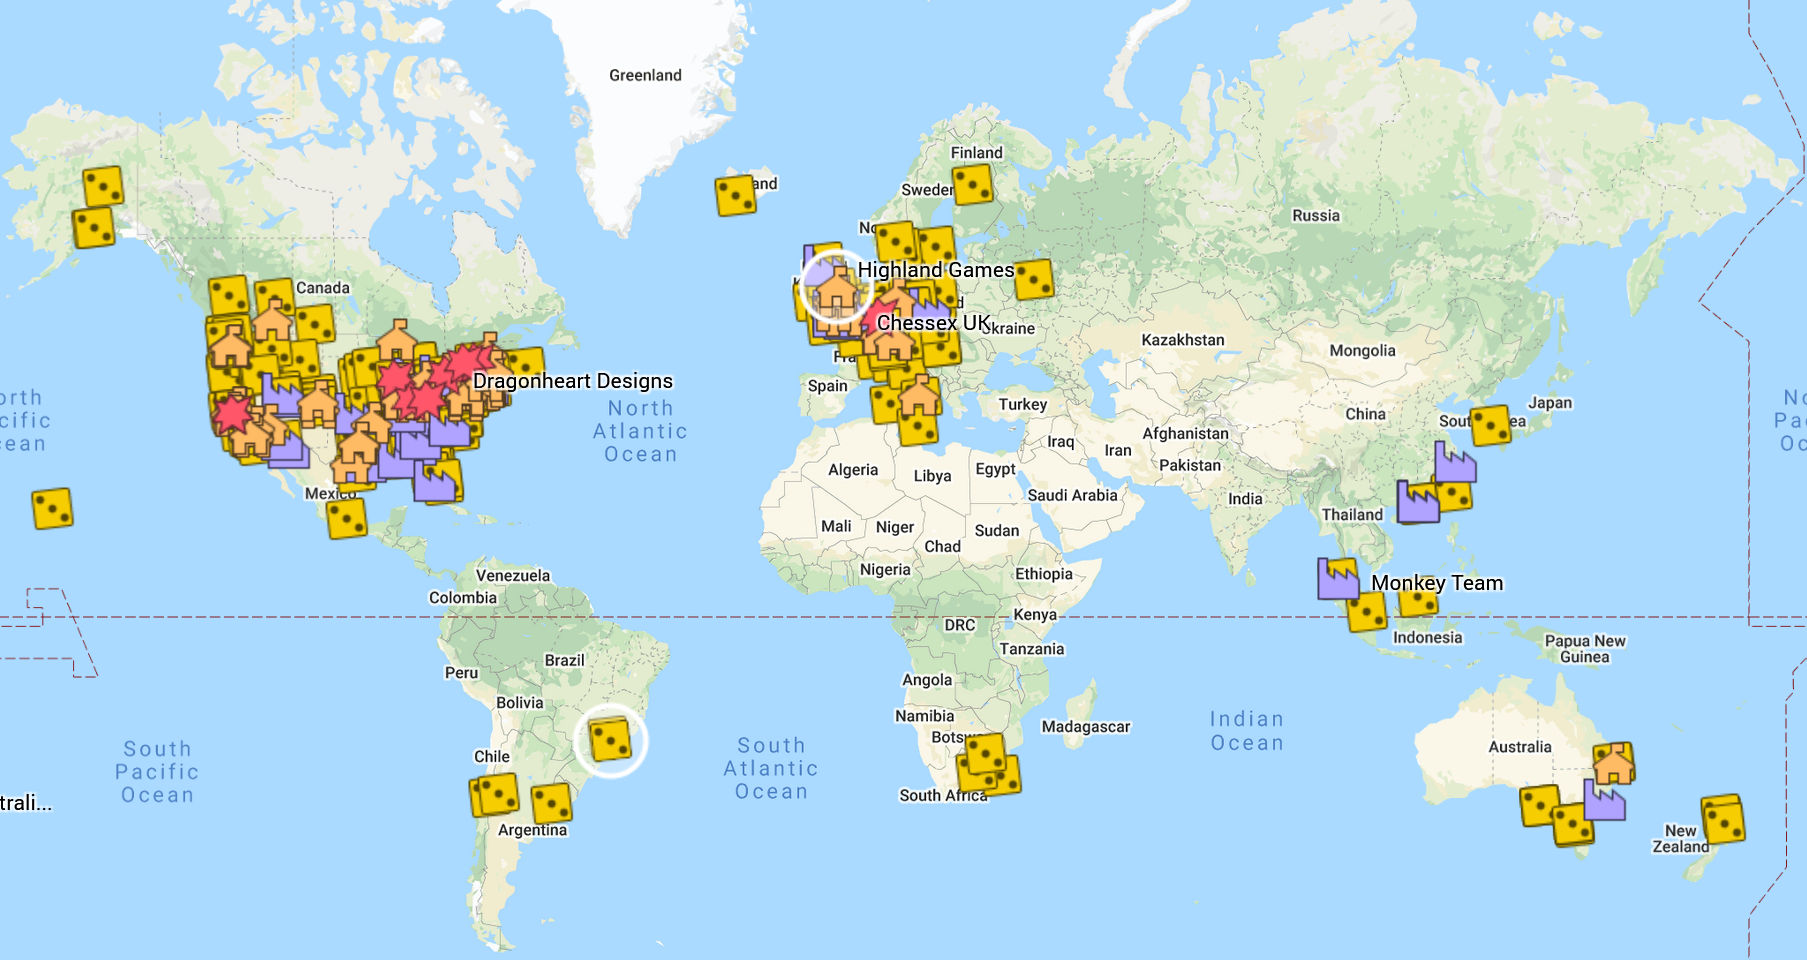 http://dicecollector.com/images/diceinfo_dice_collector_map.jpg